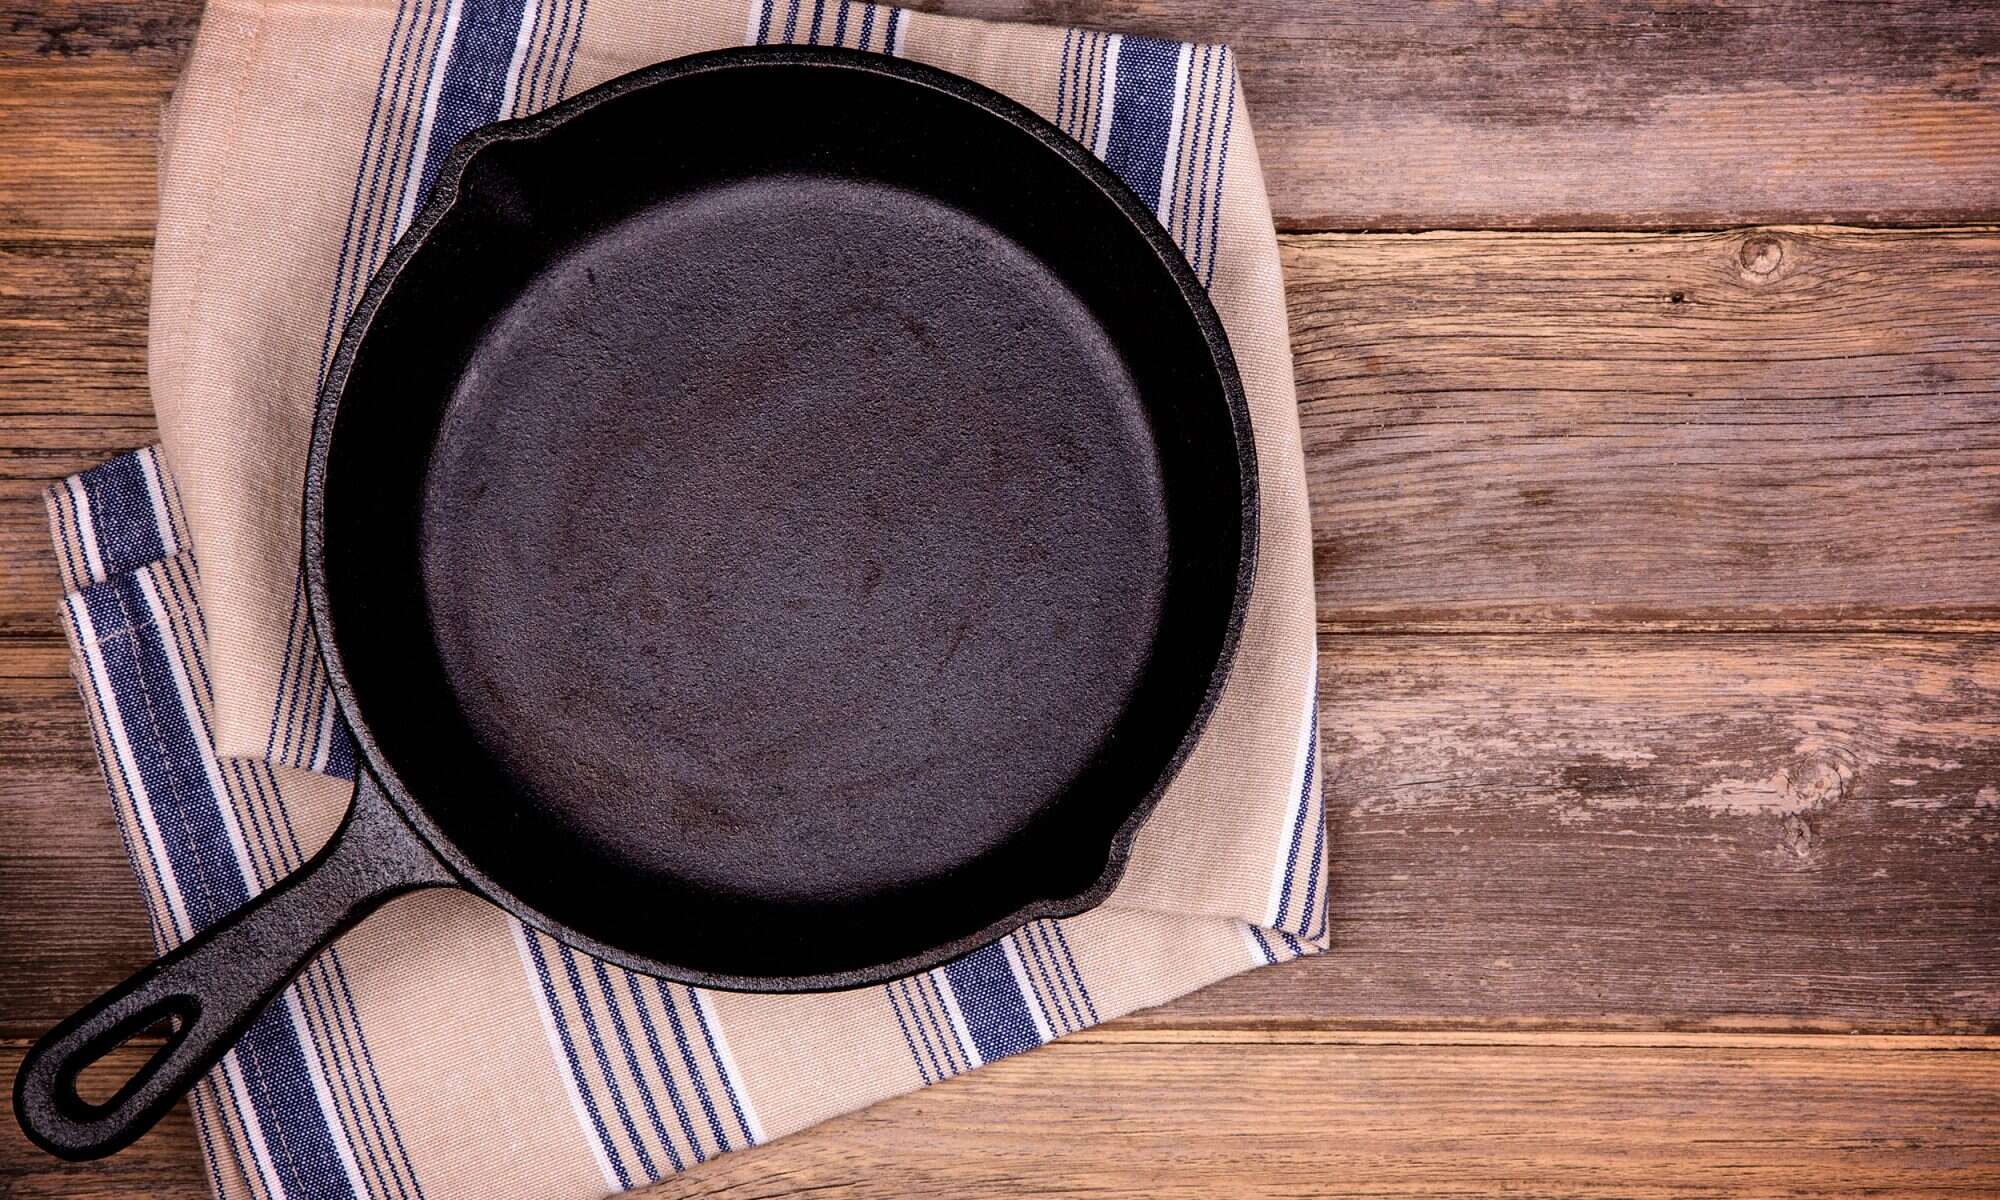 Why You Don't Need an Expensive Cast-Iron Pan